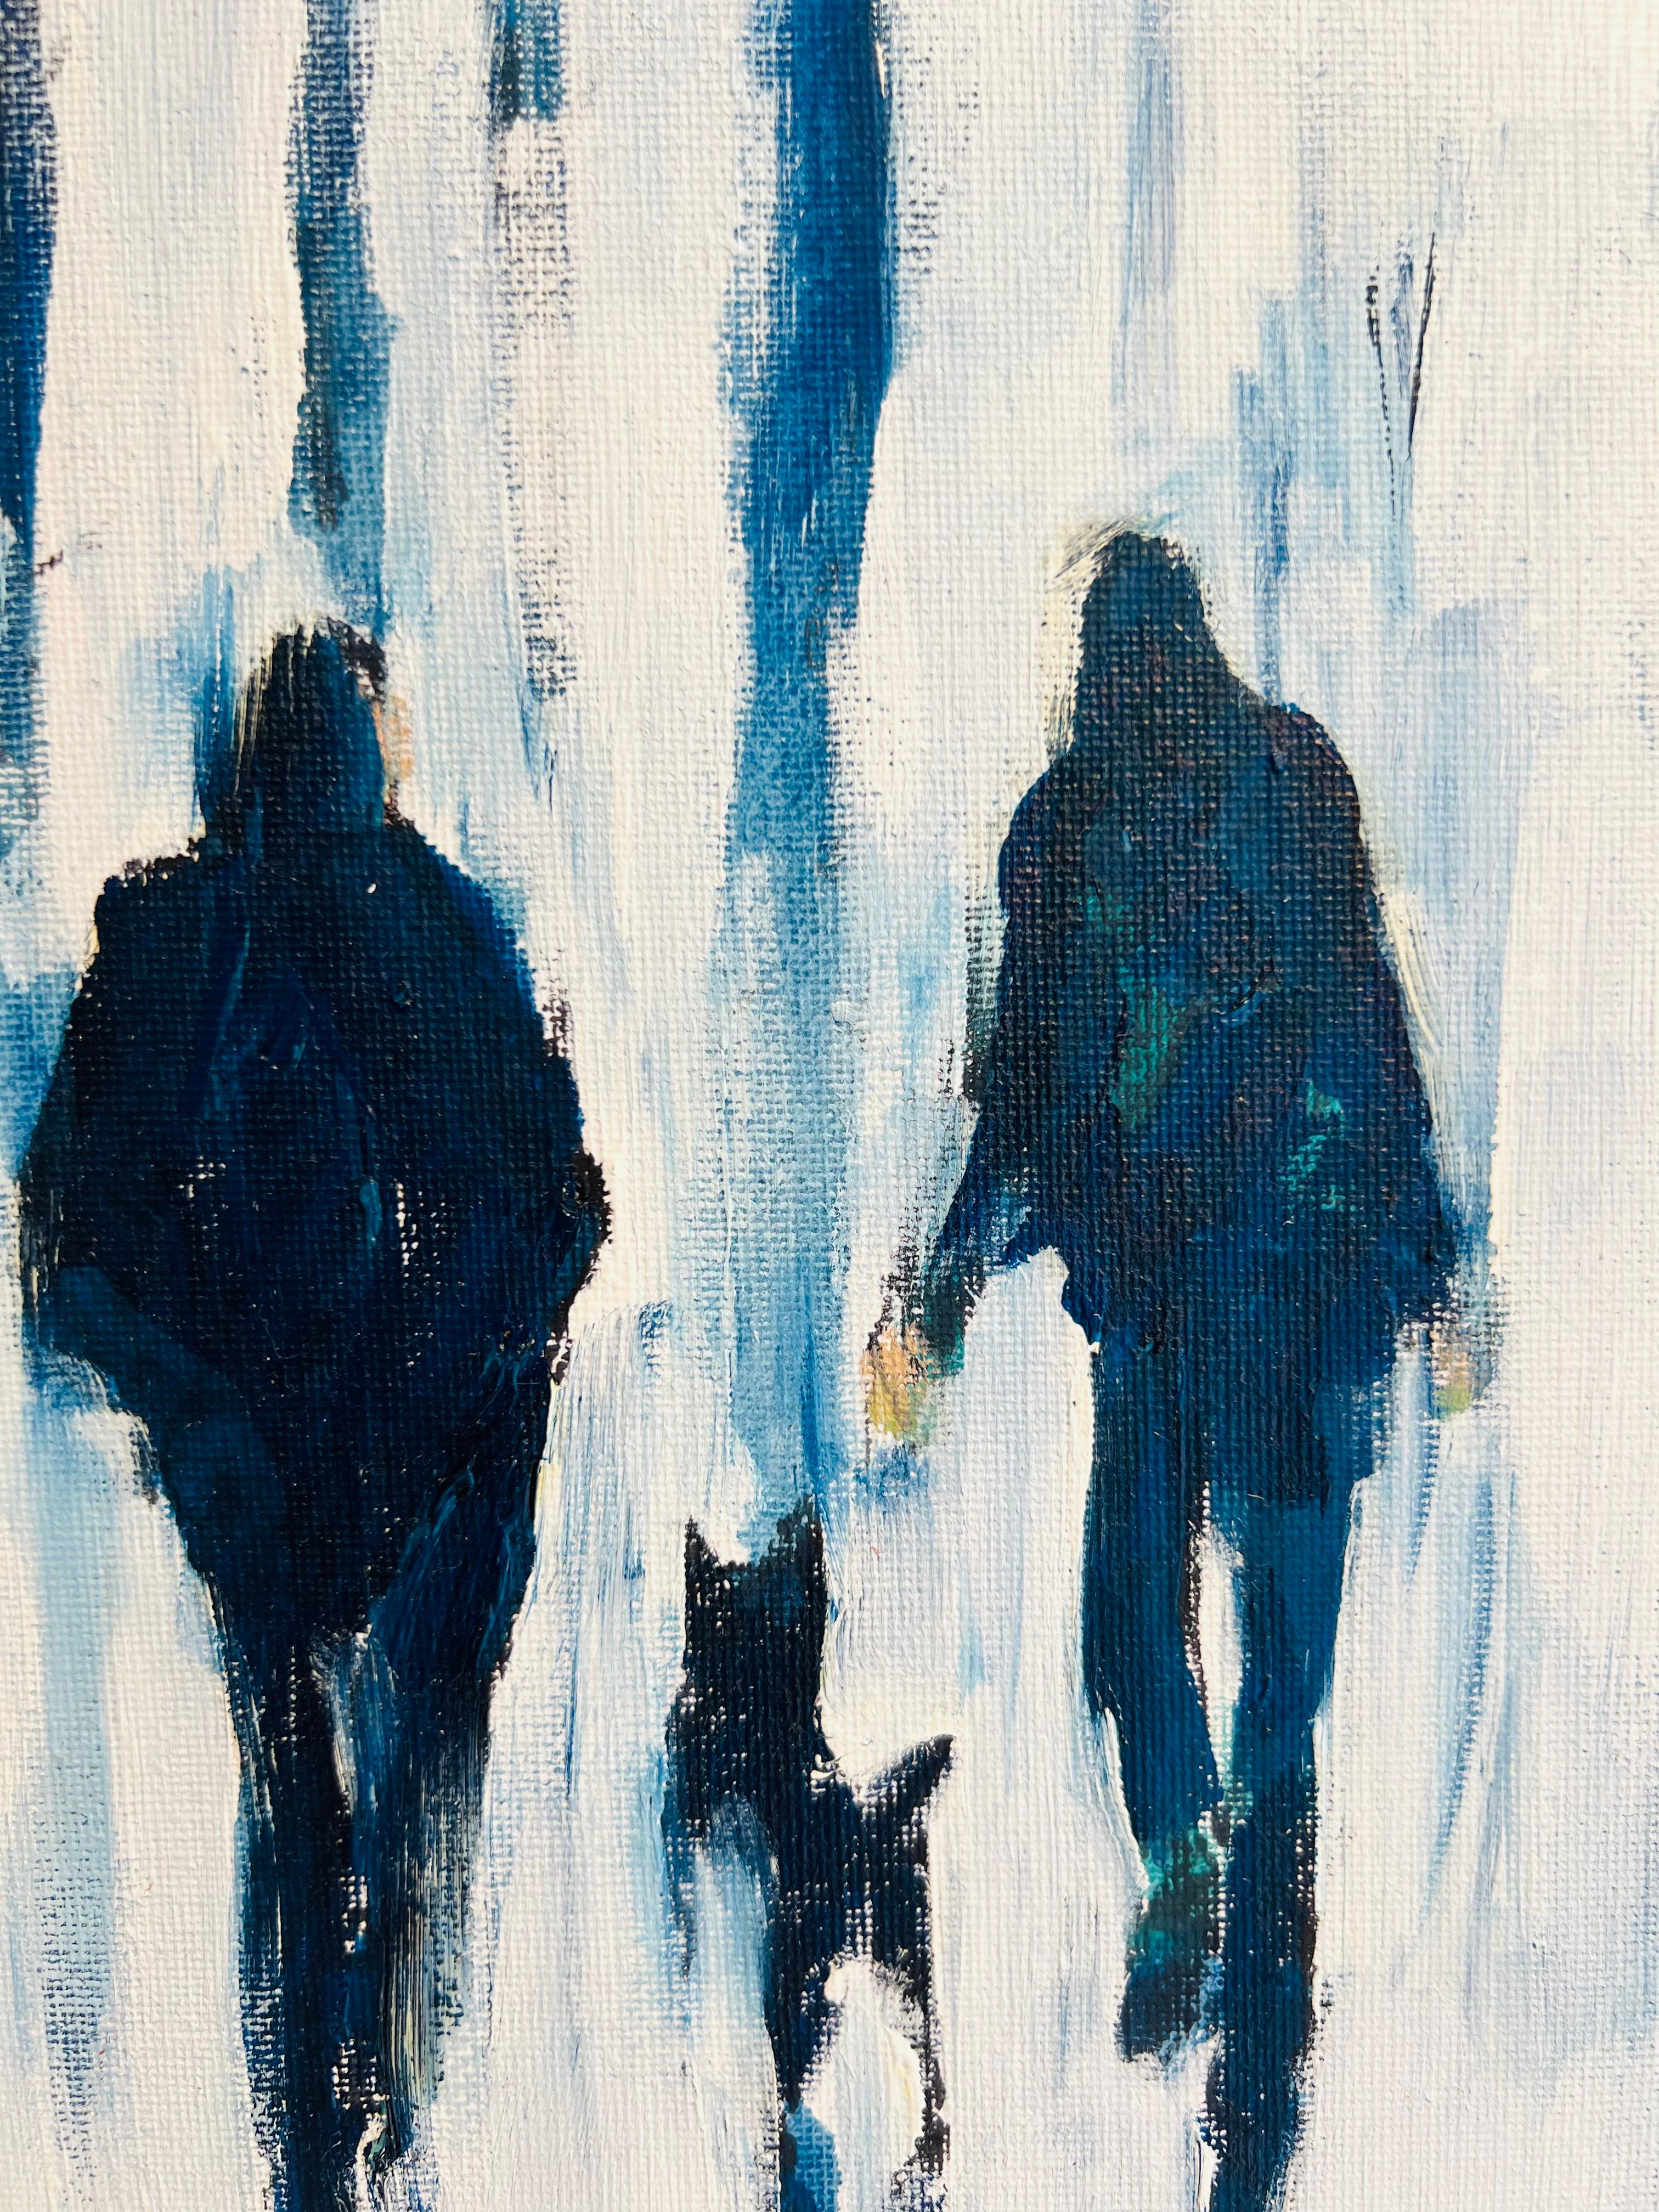 Park Life, The Dog Walkers II- Original Impressionism figurative oil painting - Purple Figurative Painting by Richard Gower